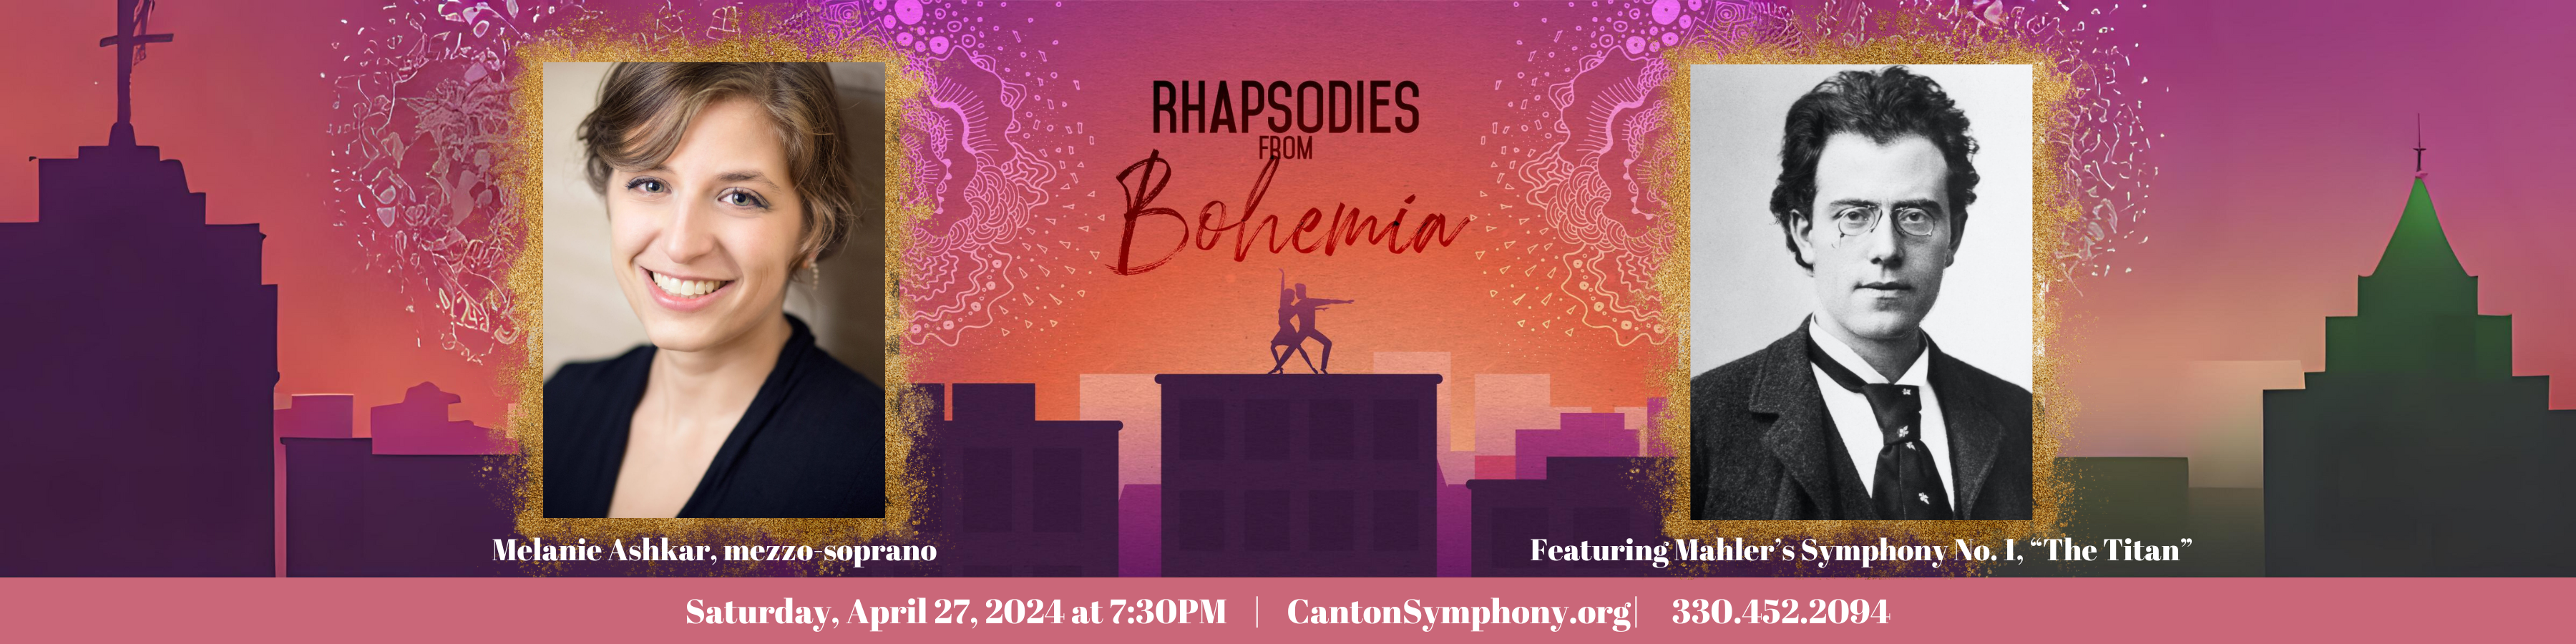 Website banner featuring concert information for the Canton Symphony Orchestra's final concert of the 2023-2024 season, Rhapsodies from Bohemia. It is Saturday, April 27, 2024 at 7:30pm and features Mahler's Symphony No. 1, "The Titan," and solo vocal performance by Melanie Ashkar, mezzo-soprano.